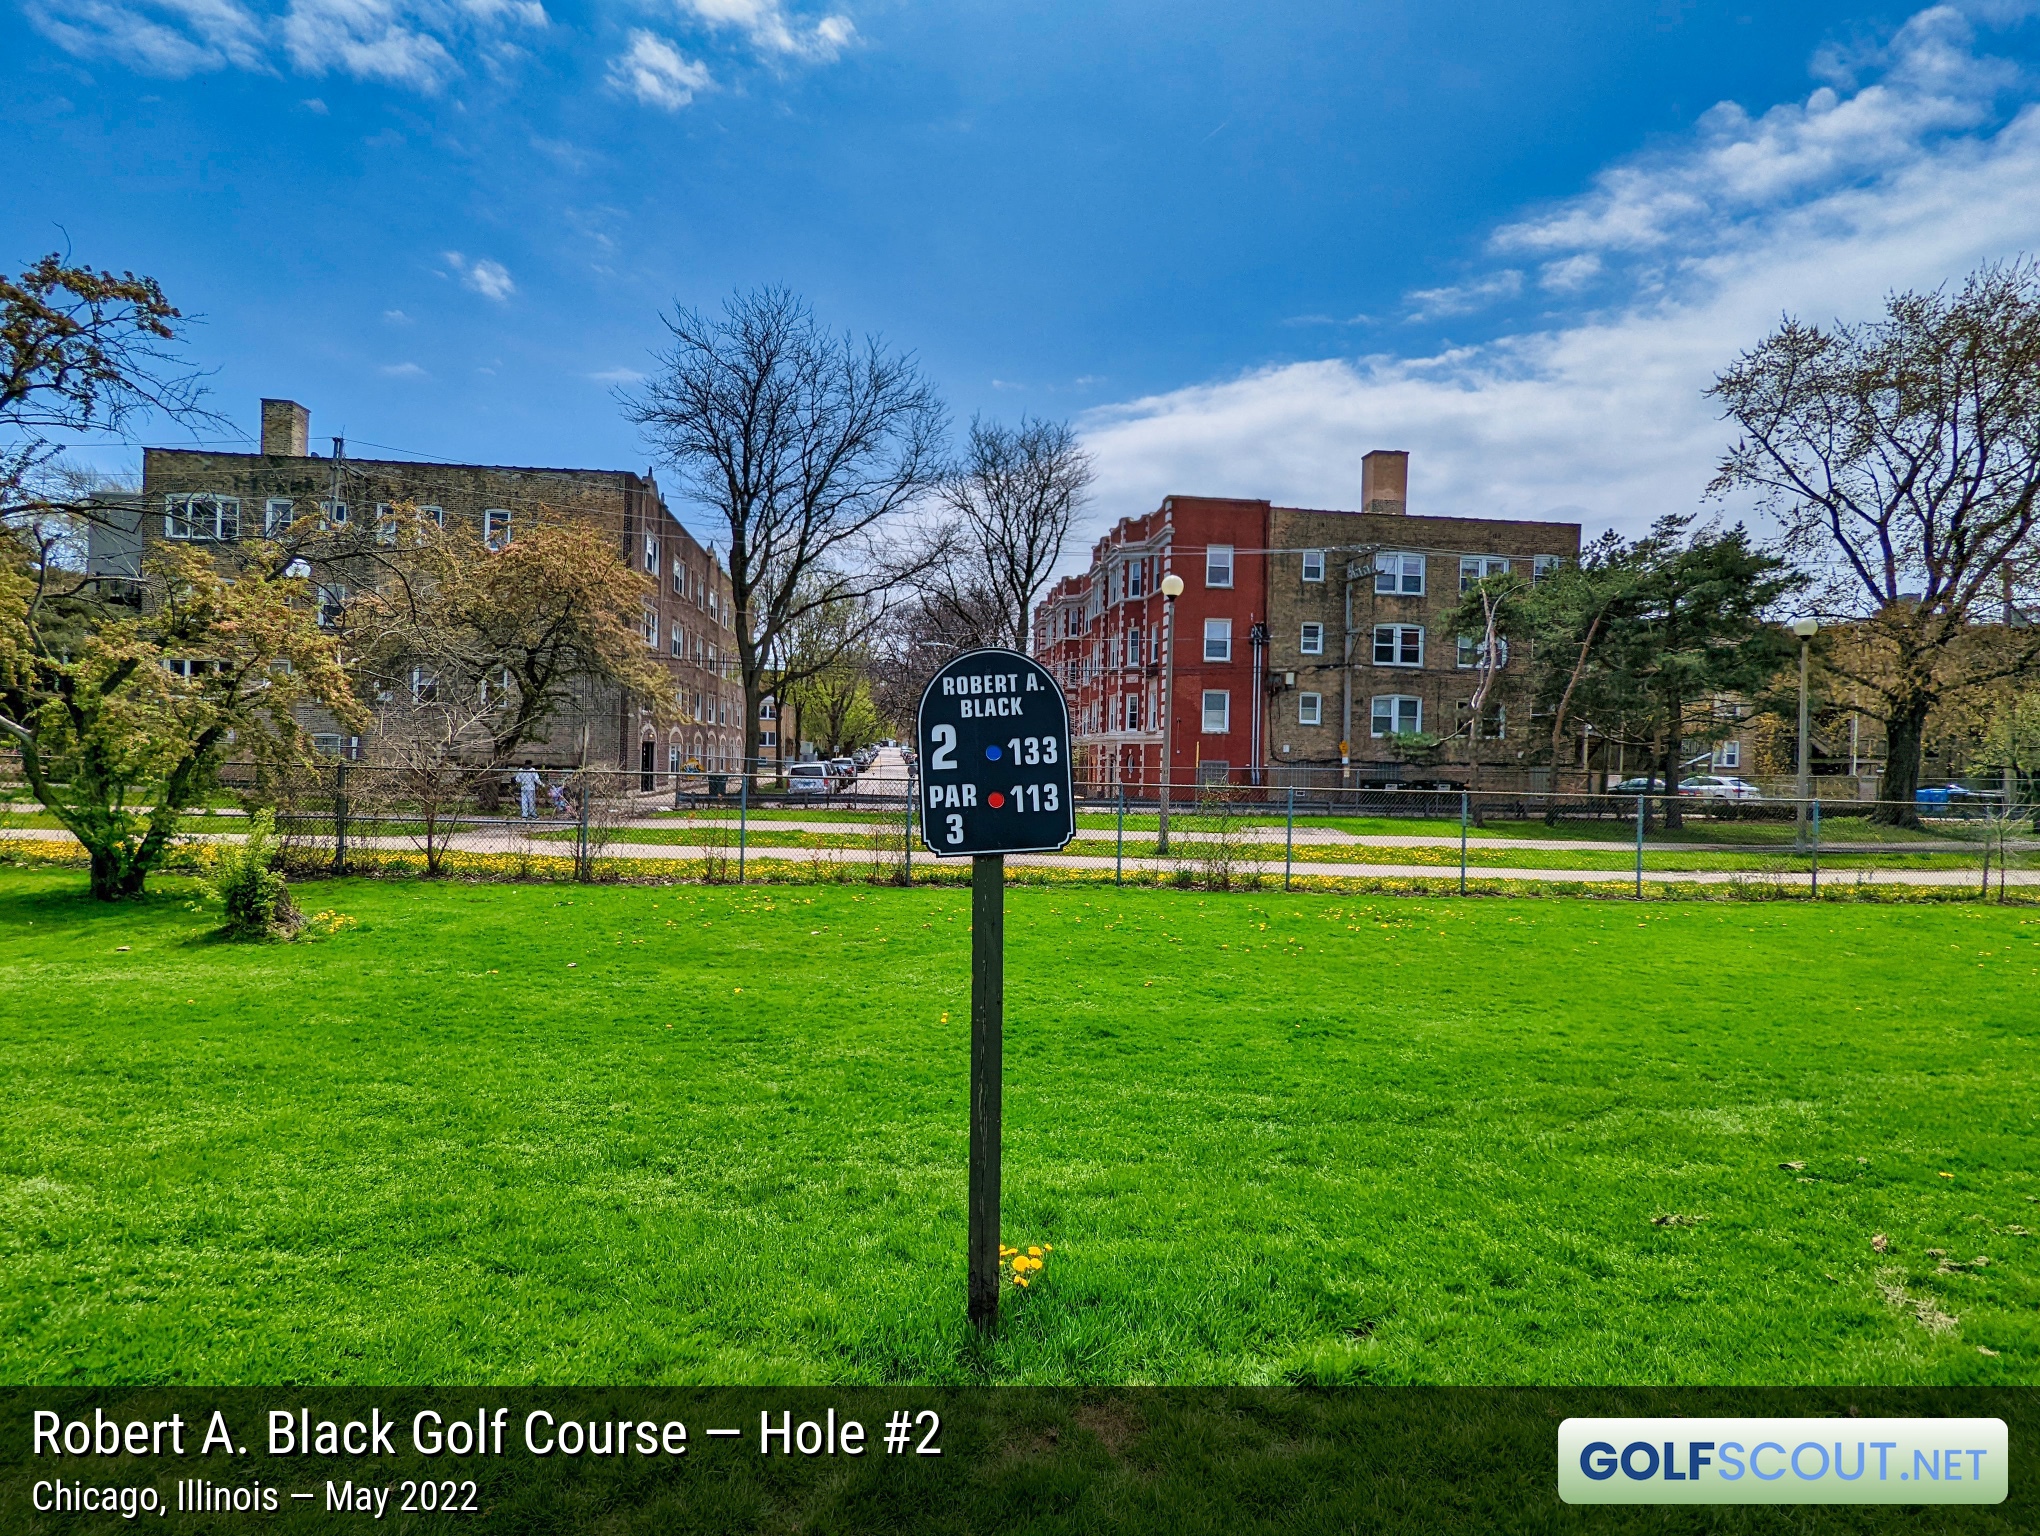 Photo of hole #2 at Robert A. Black Golf Course in Chicago, Illinois. 